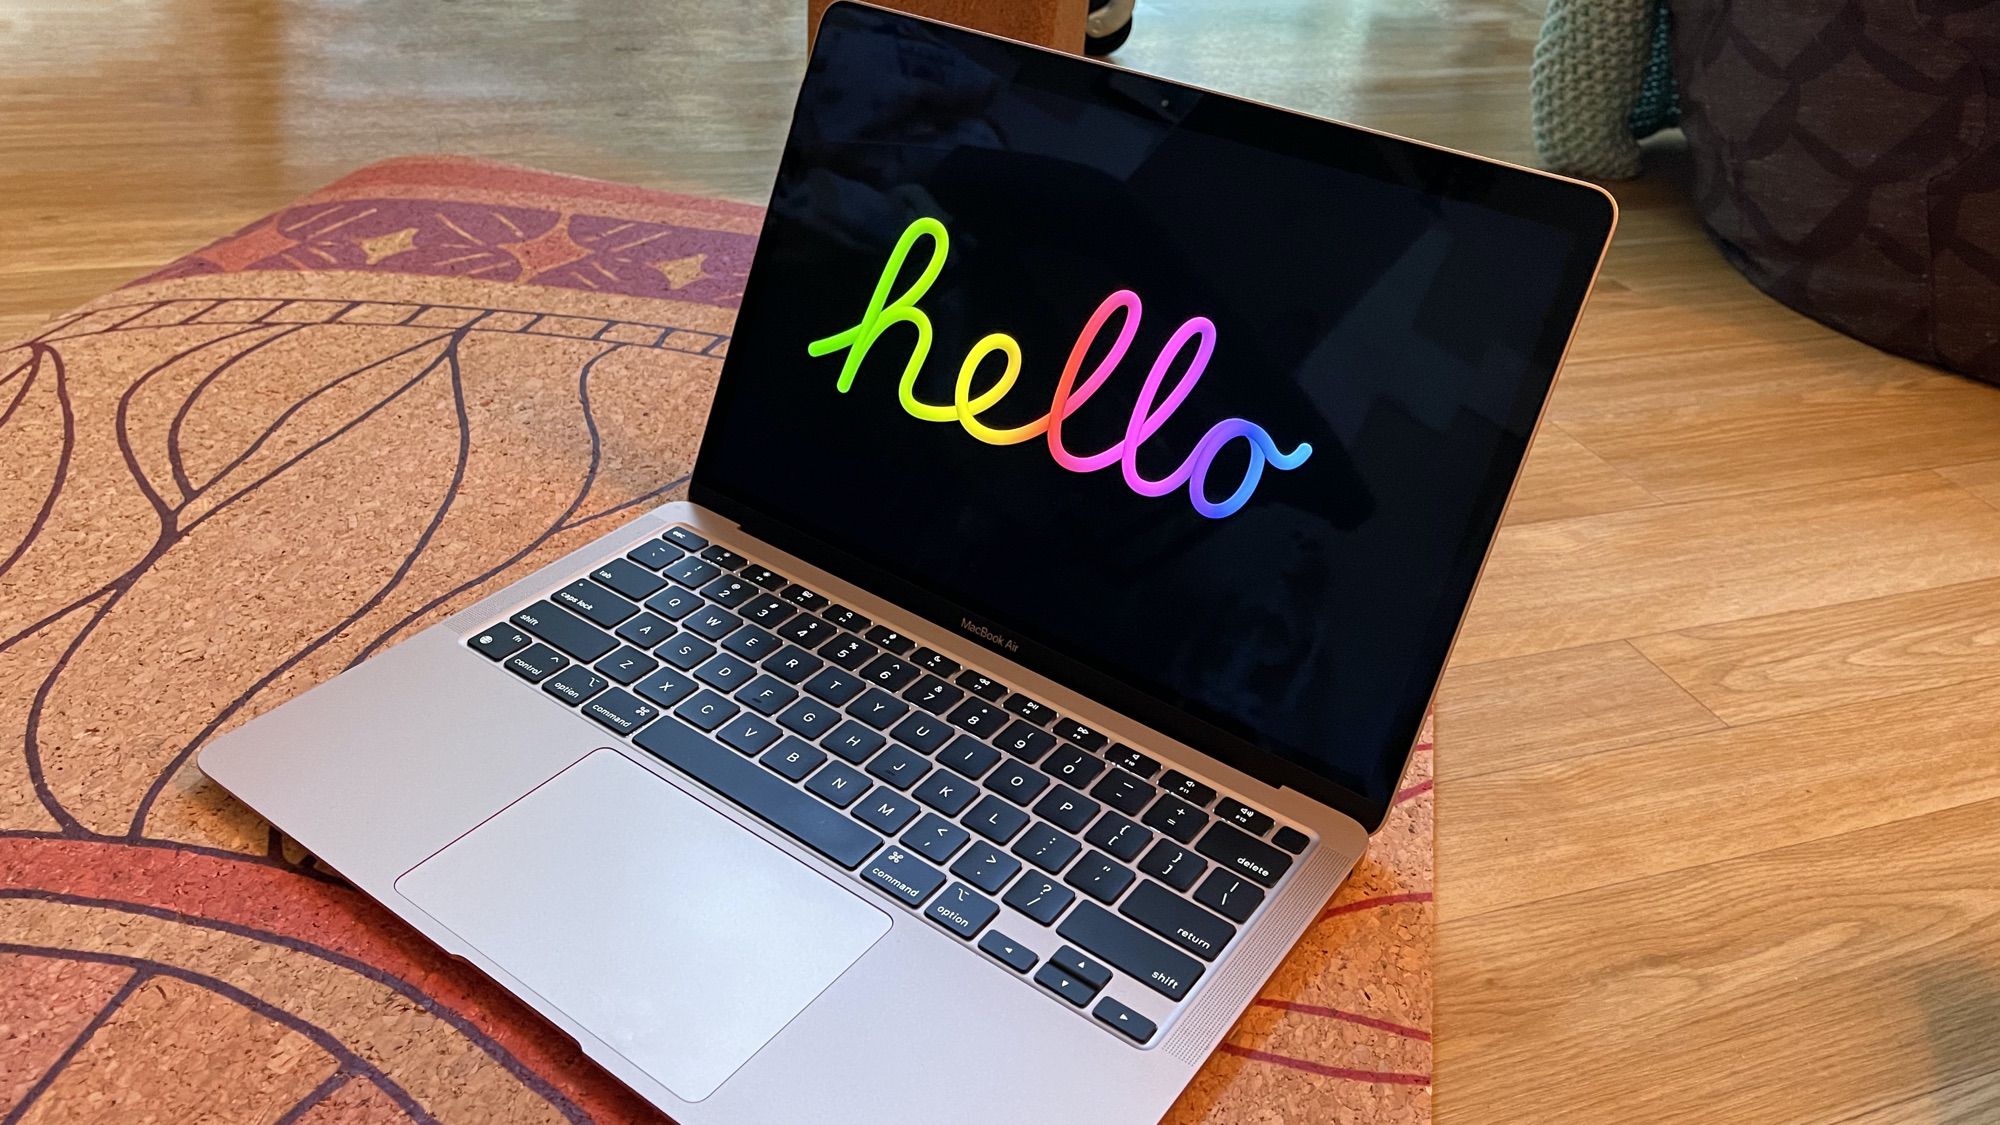 Apple adds a new ‘Hello’ screen saver to macOS Big Sur 11.3